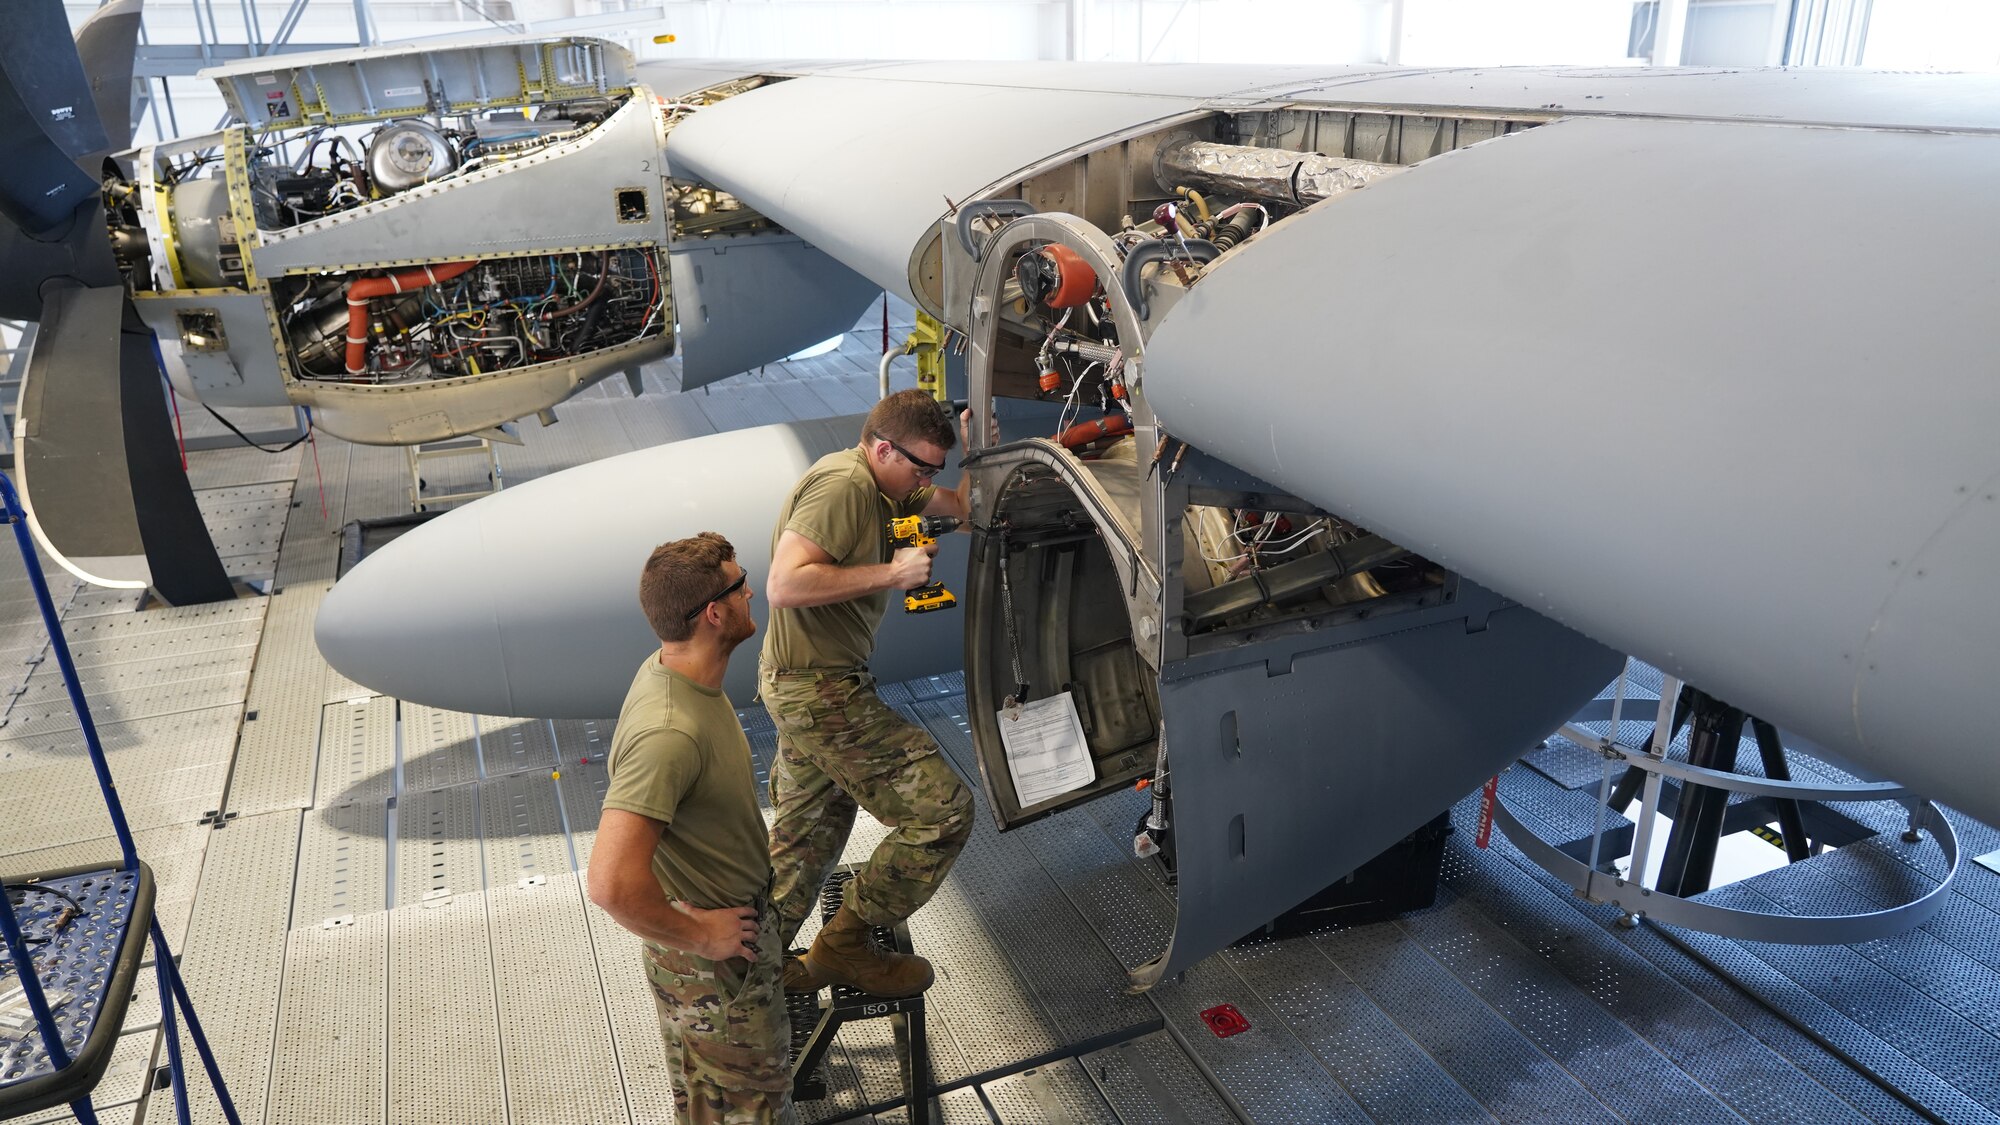 Tech. Sgt. Kevin Lancaster supervises Staff Sgt. William Parker, 403rd Fabrication Flight aircraft structure mechanic, drills a hole in the engine bulkhead of a WC-130J Super Hercules aircraft at Keesler Air Force Base, Miss., Aug. 24, 2021. The flight is responsible for aircraft structural maintenance to include painting and sanding of aircraft parts. The 403rd Wing’s fleet consists of 10 WC-130J and 10 C-130J aircraft which are flown by the 53rd Weather Reconnaissance Squadron and 815th Airlift Squadron, respectively. (U.S. Air Force photo by 2nd Lt. Christopher Carranza)